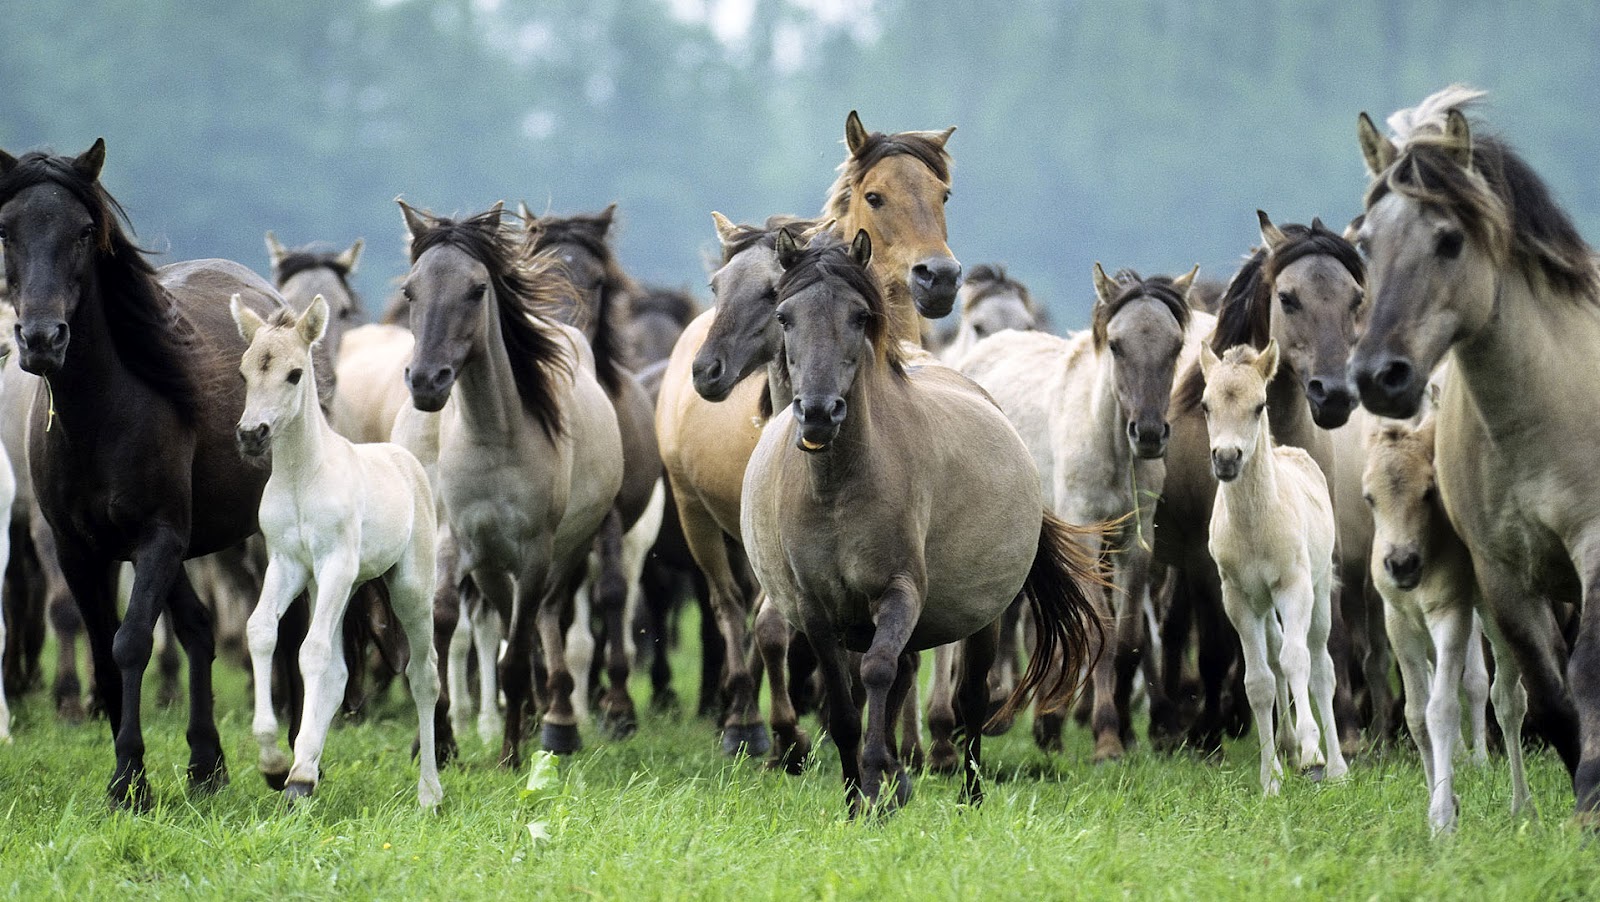  wallpapers with a group of horses HD horses wallpaper   backgrounds